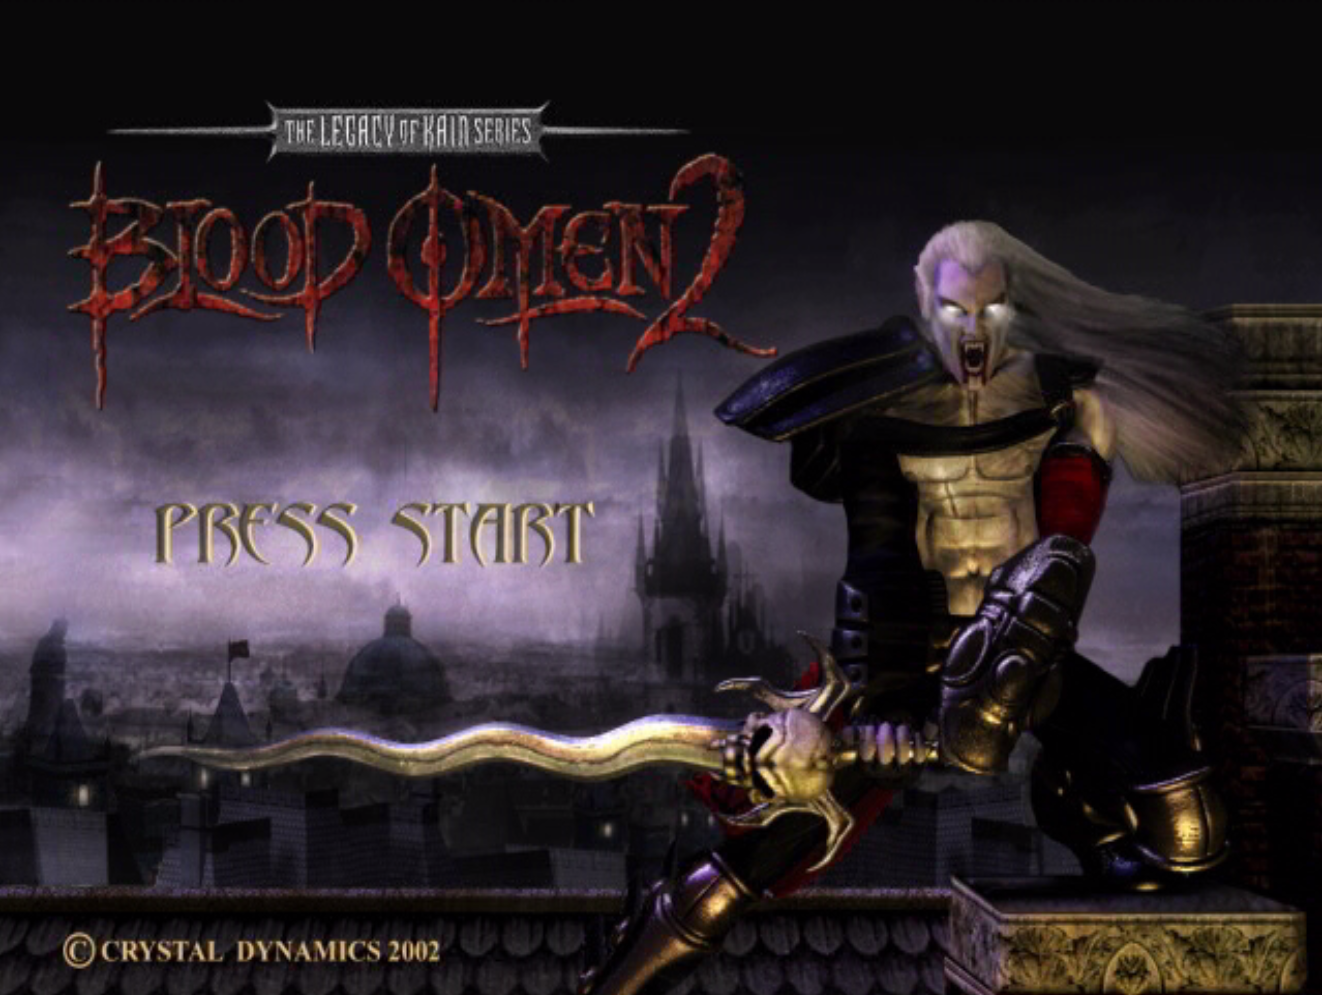 The Legacy of Kain Blood Omen 2 Title Screen